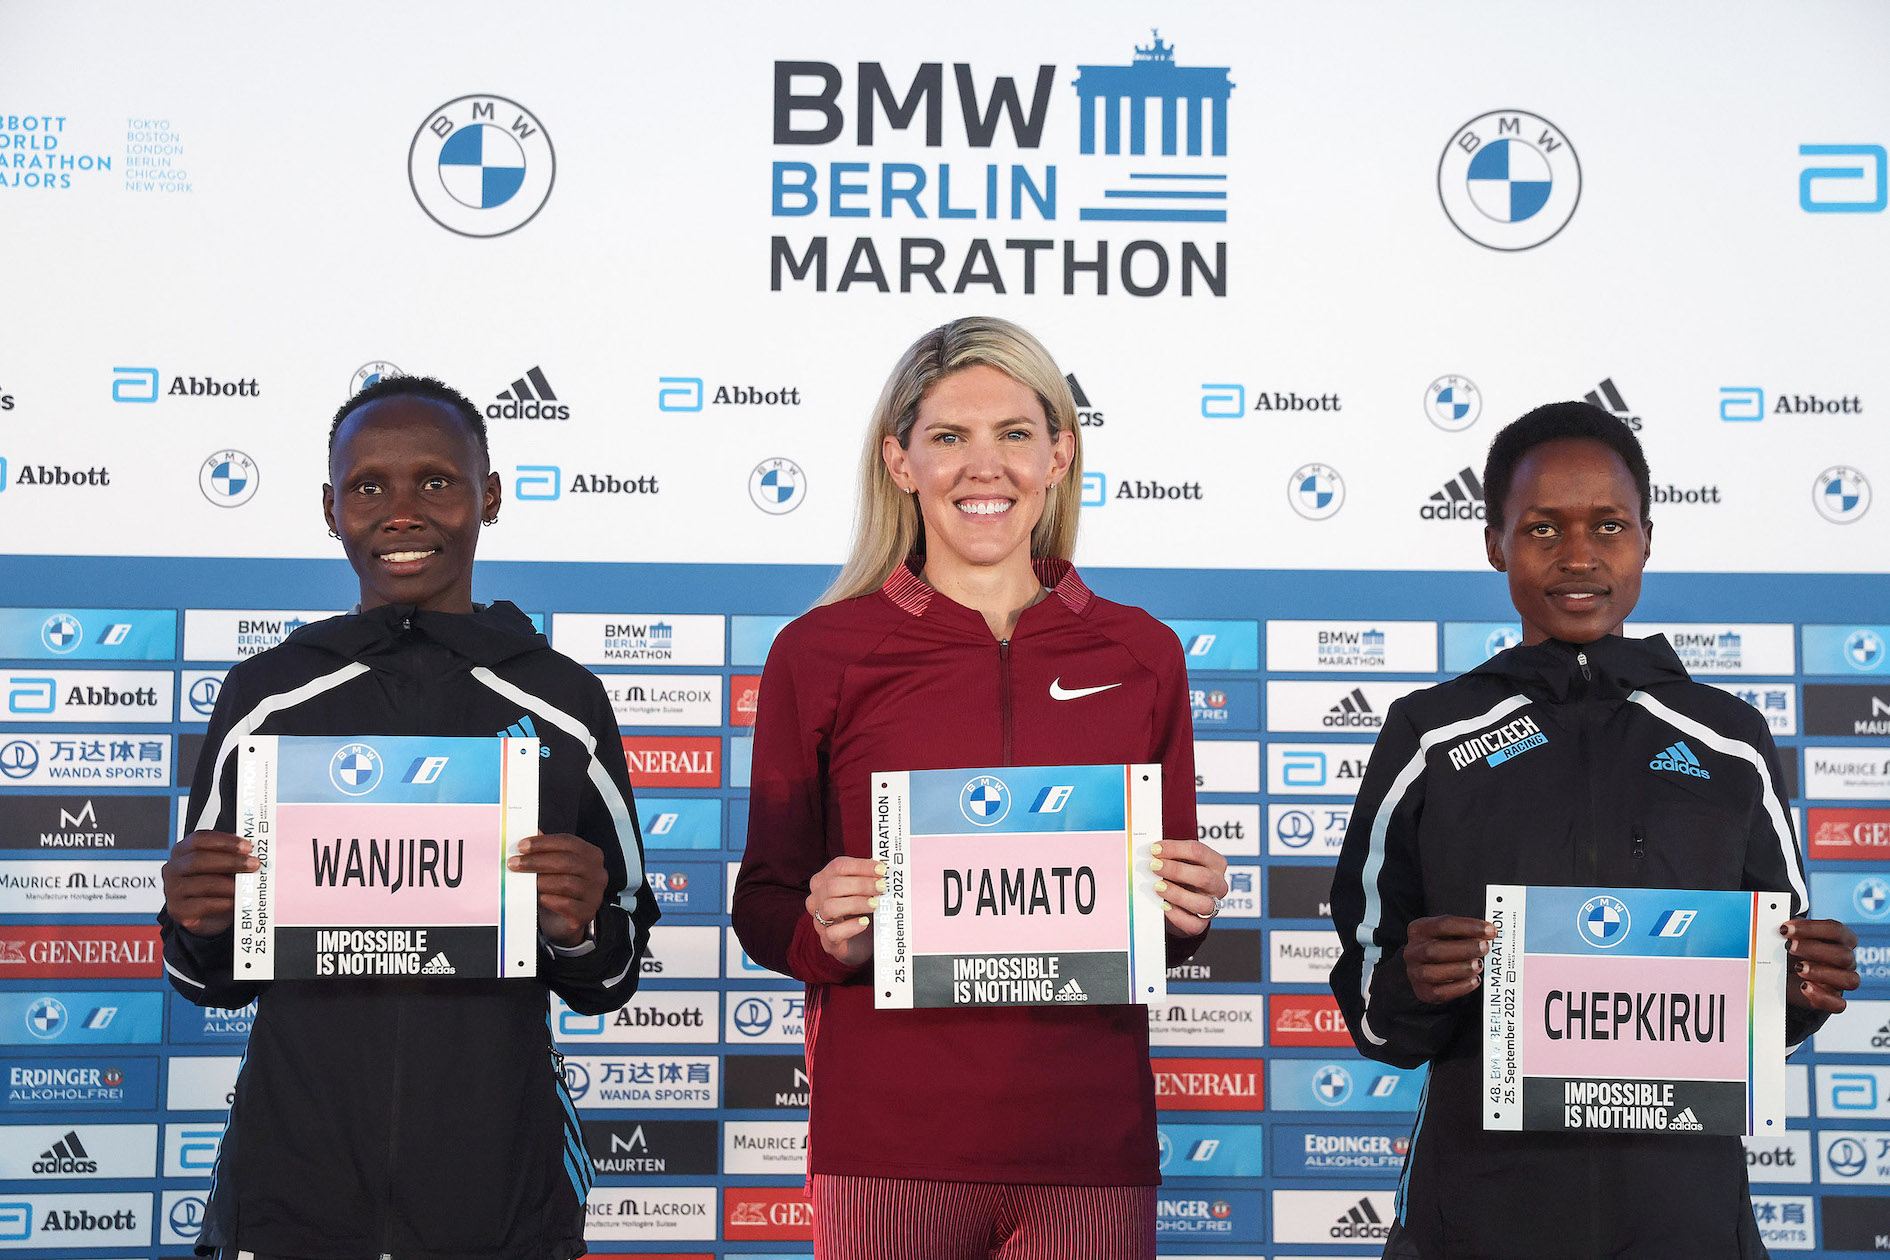 2022 Berlin Marathon Results, Tracking and Live Leaderboard